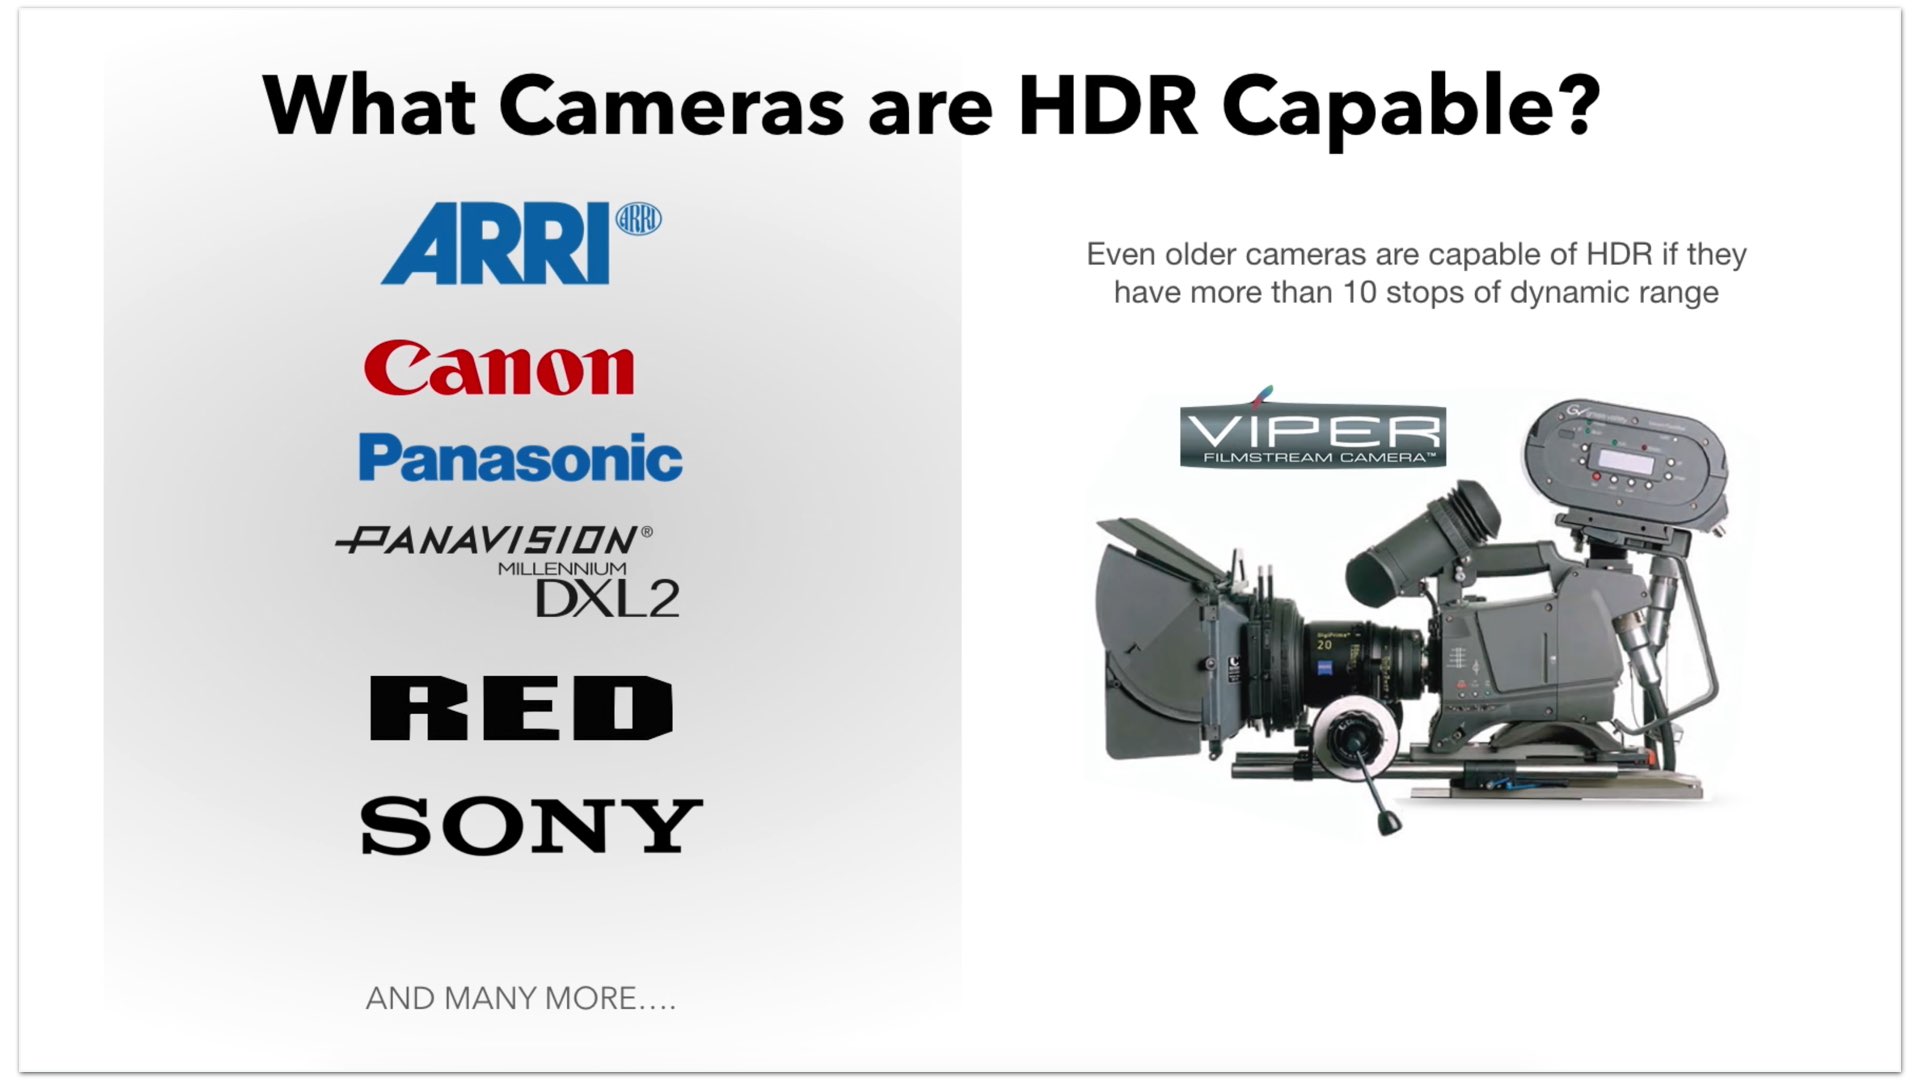 HDR capable cameras